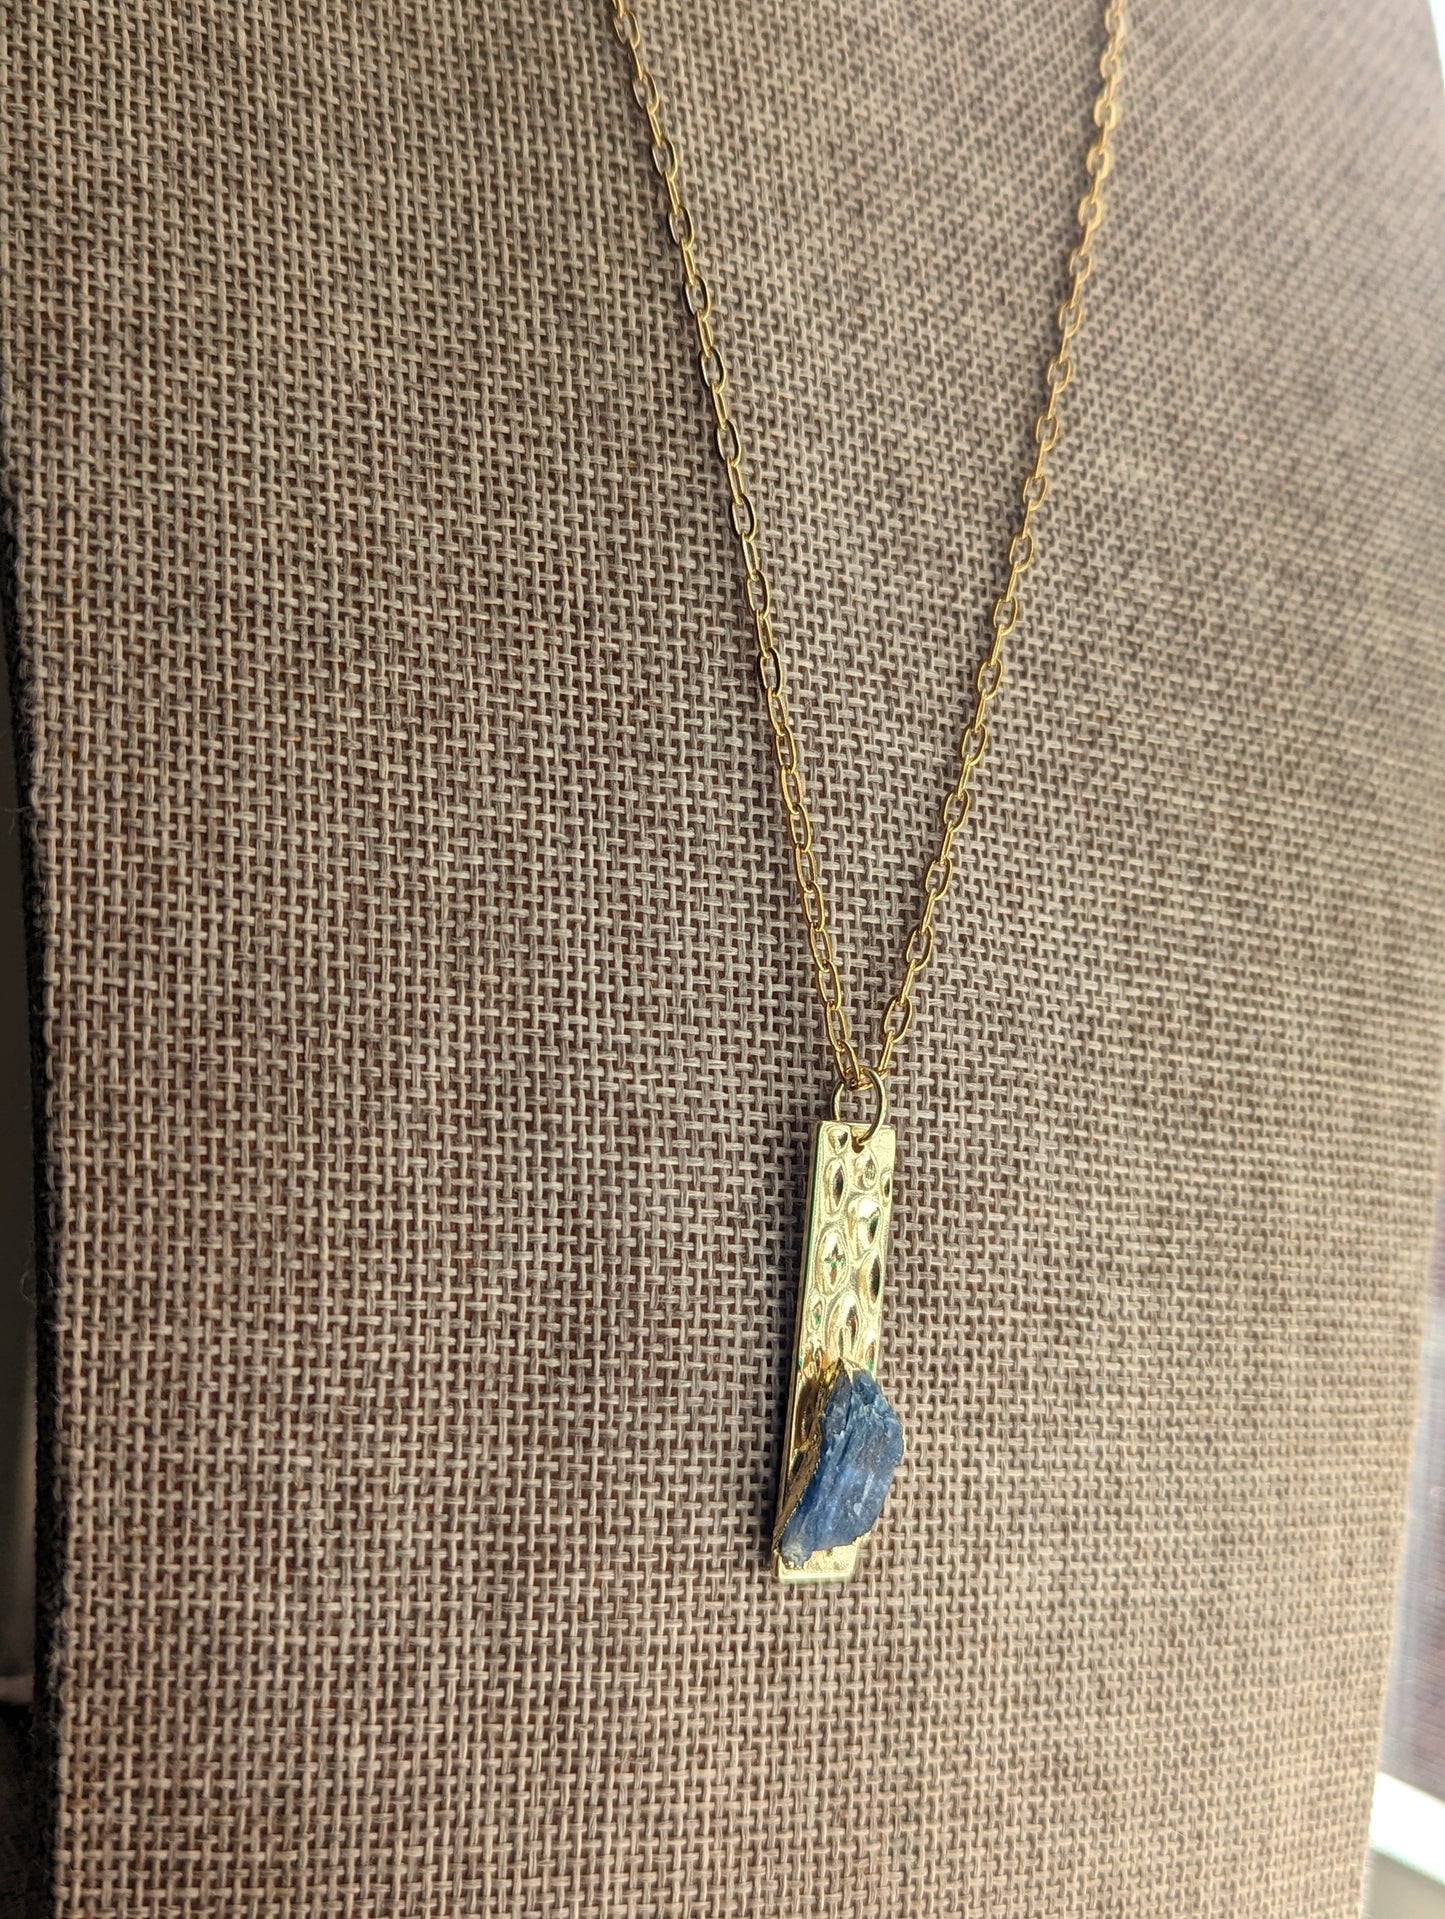 Hammered Gold and Blue Kyanite Pendant on Gold Stainless